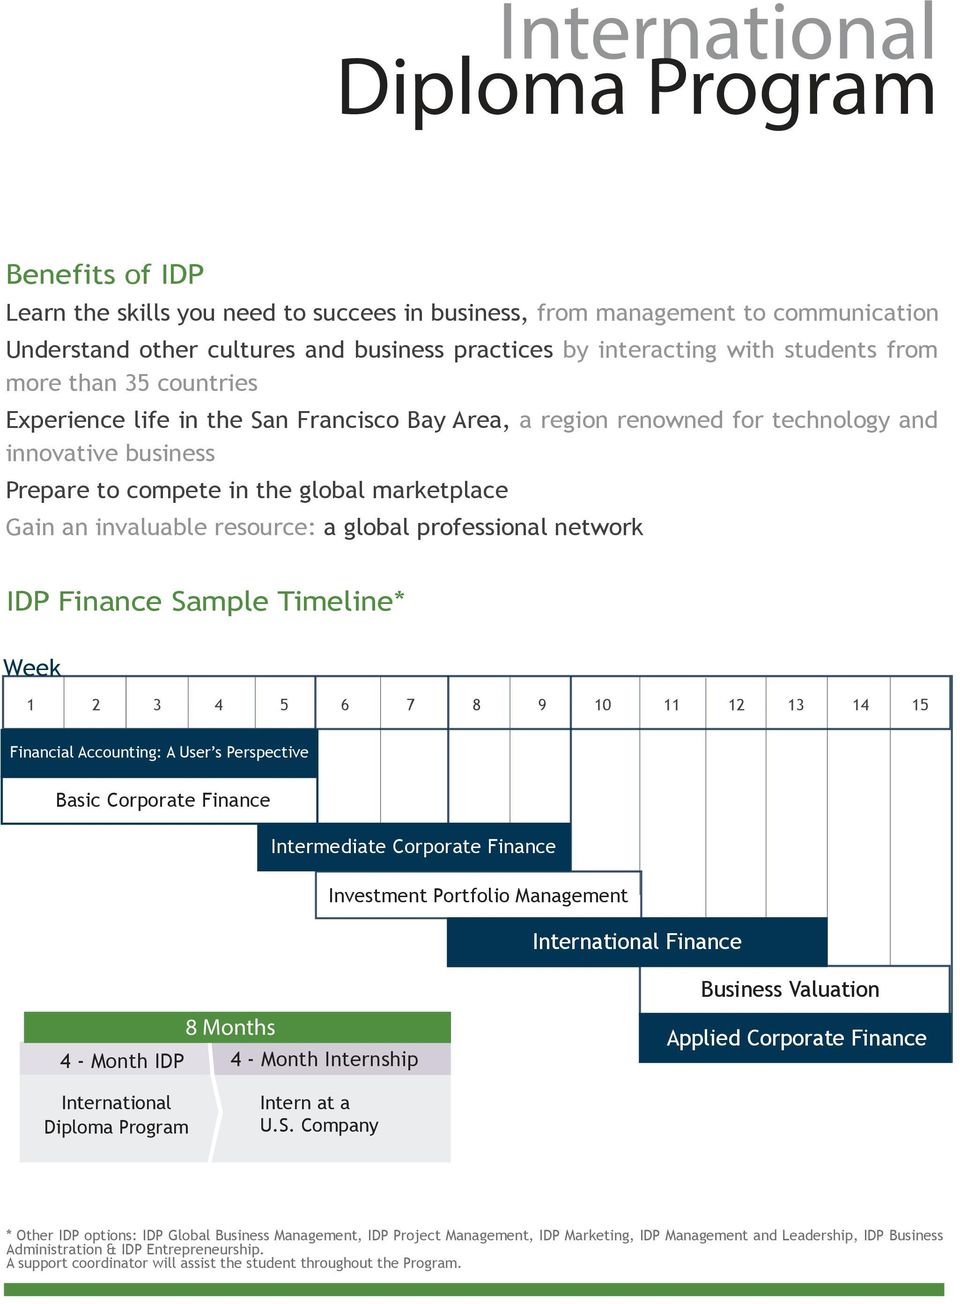 invaluable resource: a global professional network IDP Finance Sample Timeline* Week 1 2 3 4 5 6 7 8 9 10 11 1 12 13 14 15 Financial Accounting: A User s Perspective Basic Corporate Finance